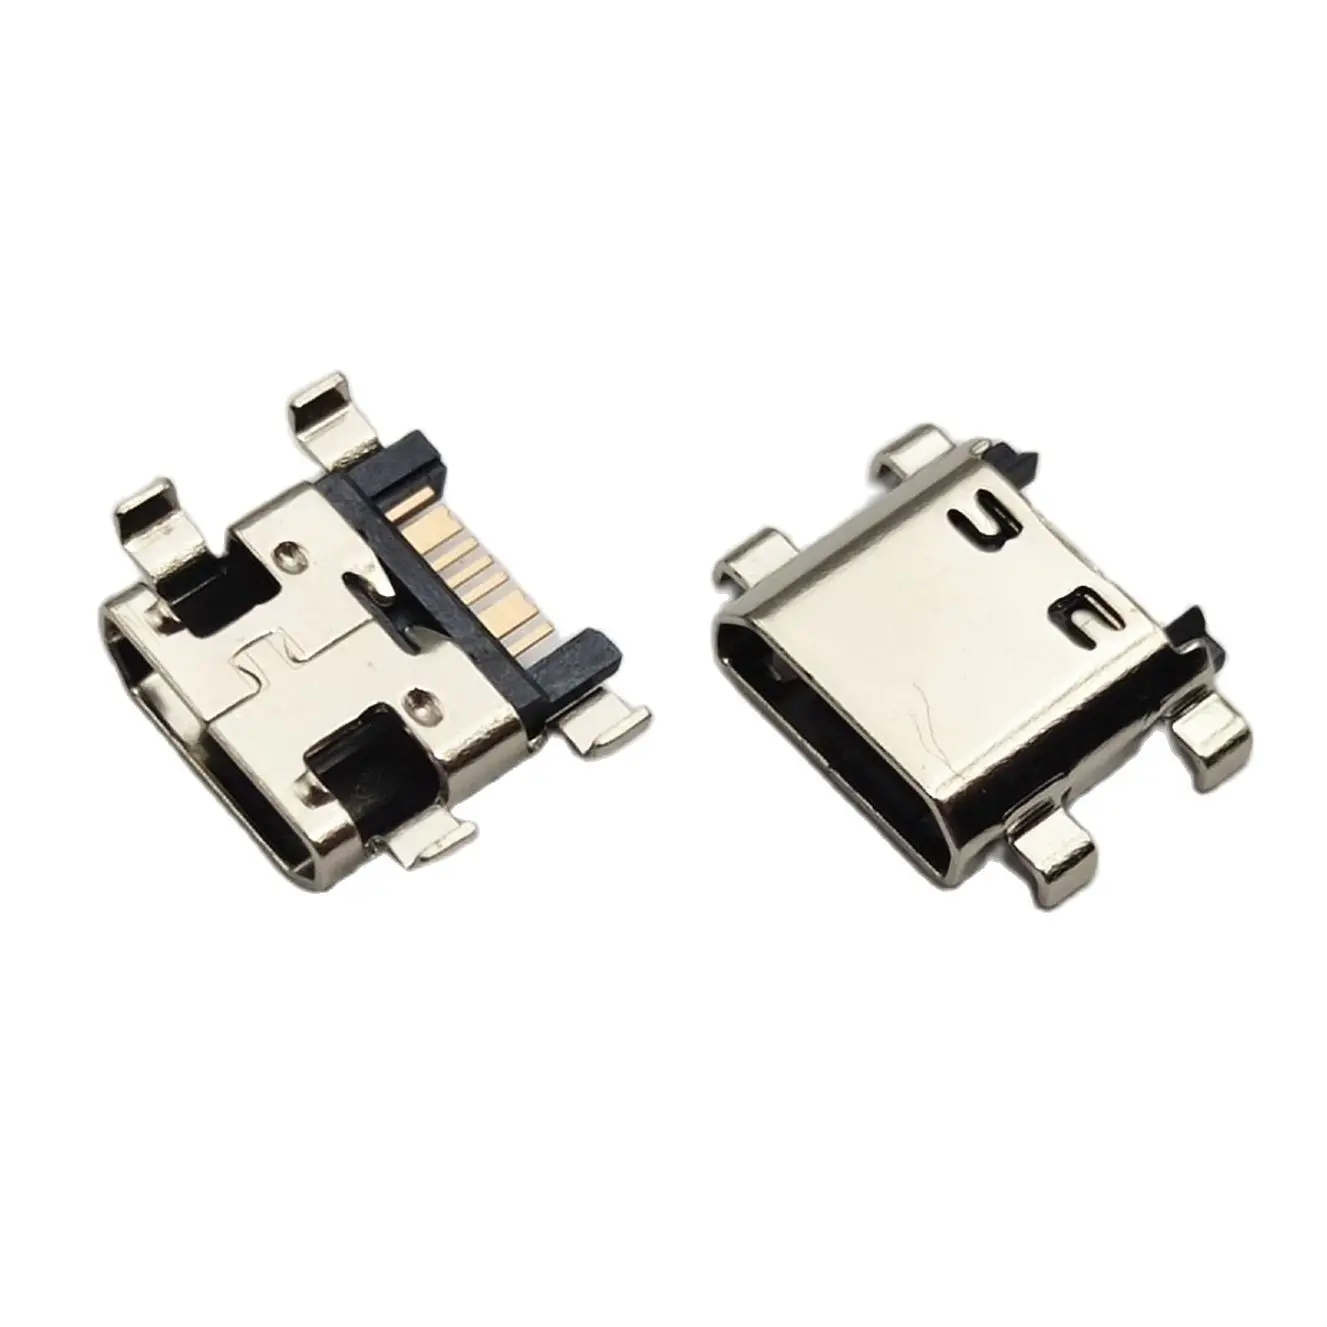 50pcs Micro USB 7pin Connector Mobile Charging port tail plug For Samsung I8262 J5 Prime On5 G5700 J7 G6100 G530 G532 J2 G3502